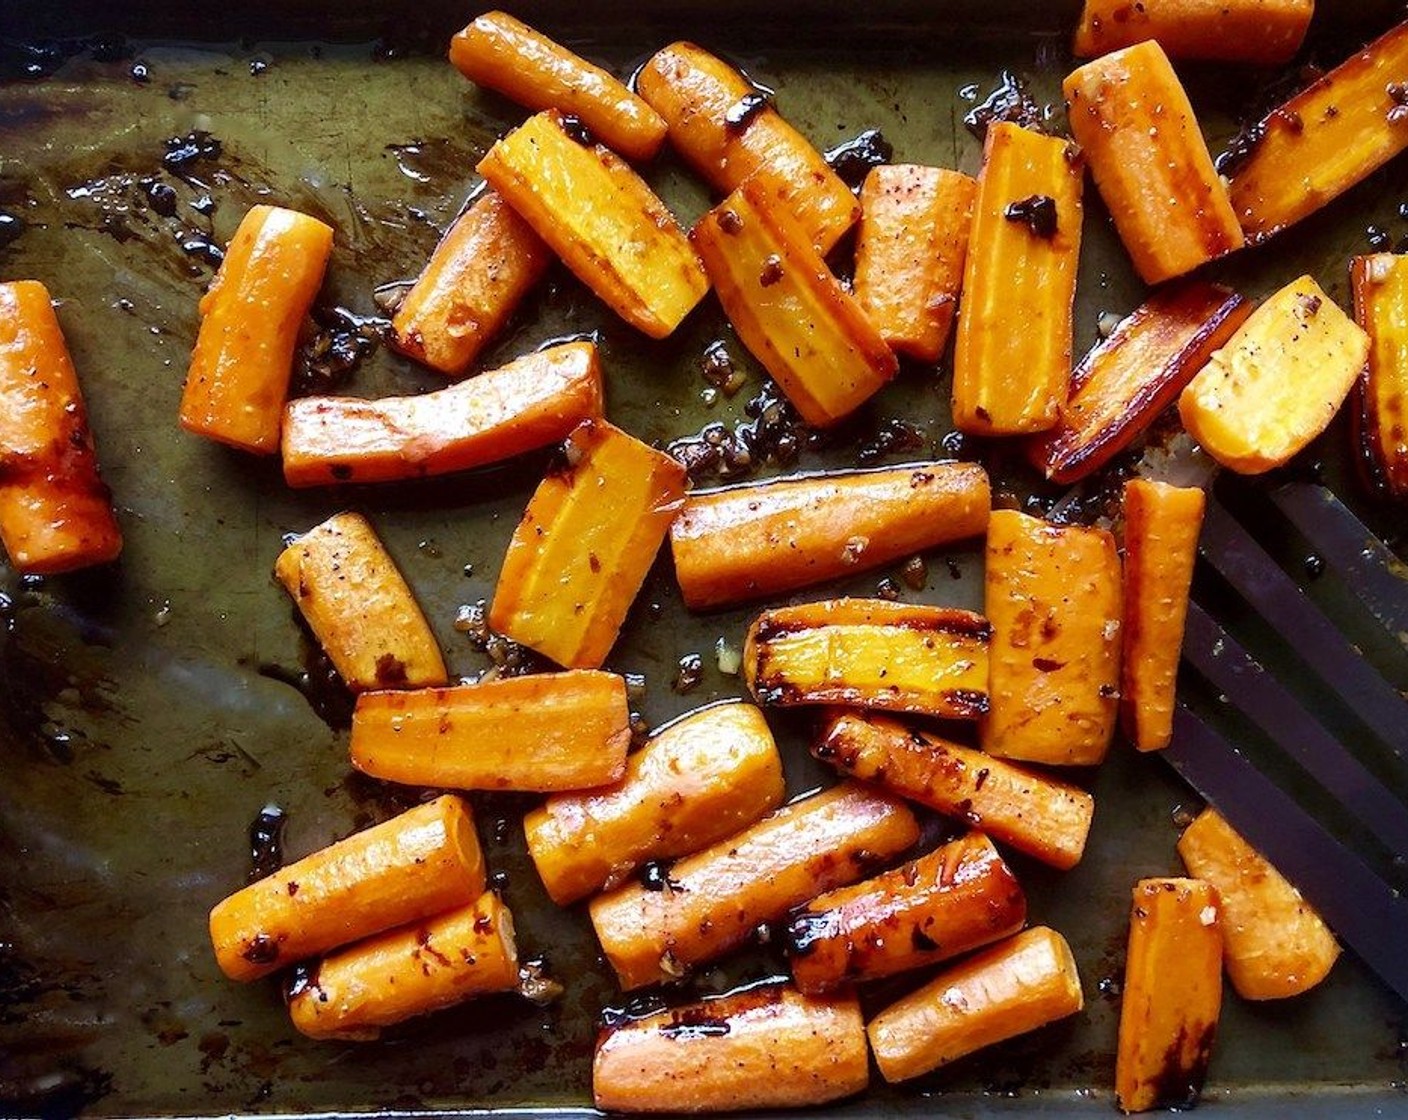 step 7 Roast for 20 minutes or until the carrots are fork-tender. If you'd like them to be more charred, place them under the broiler for 2 to 3 minutes.